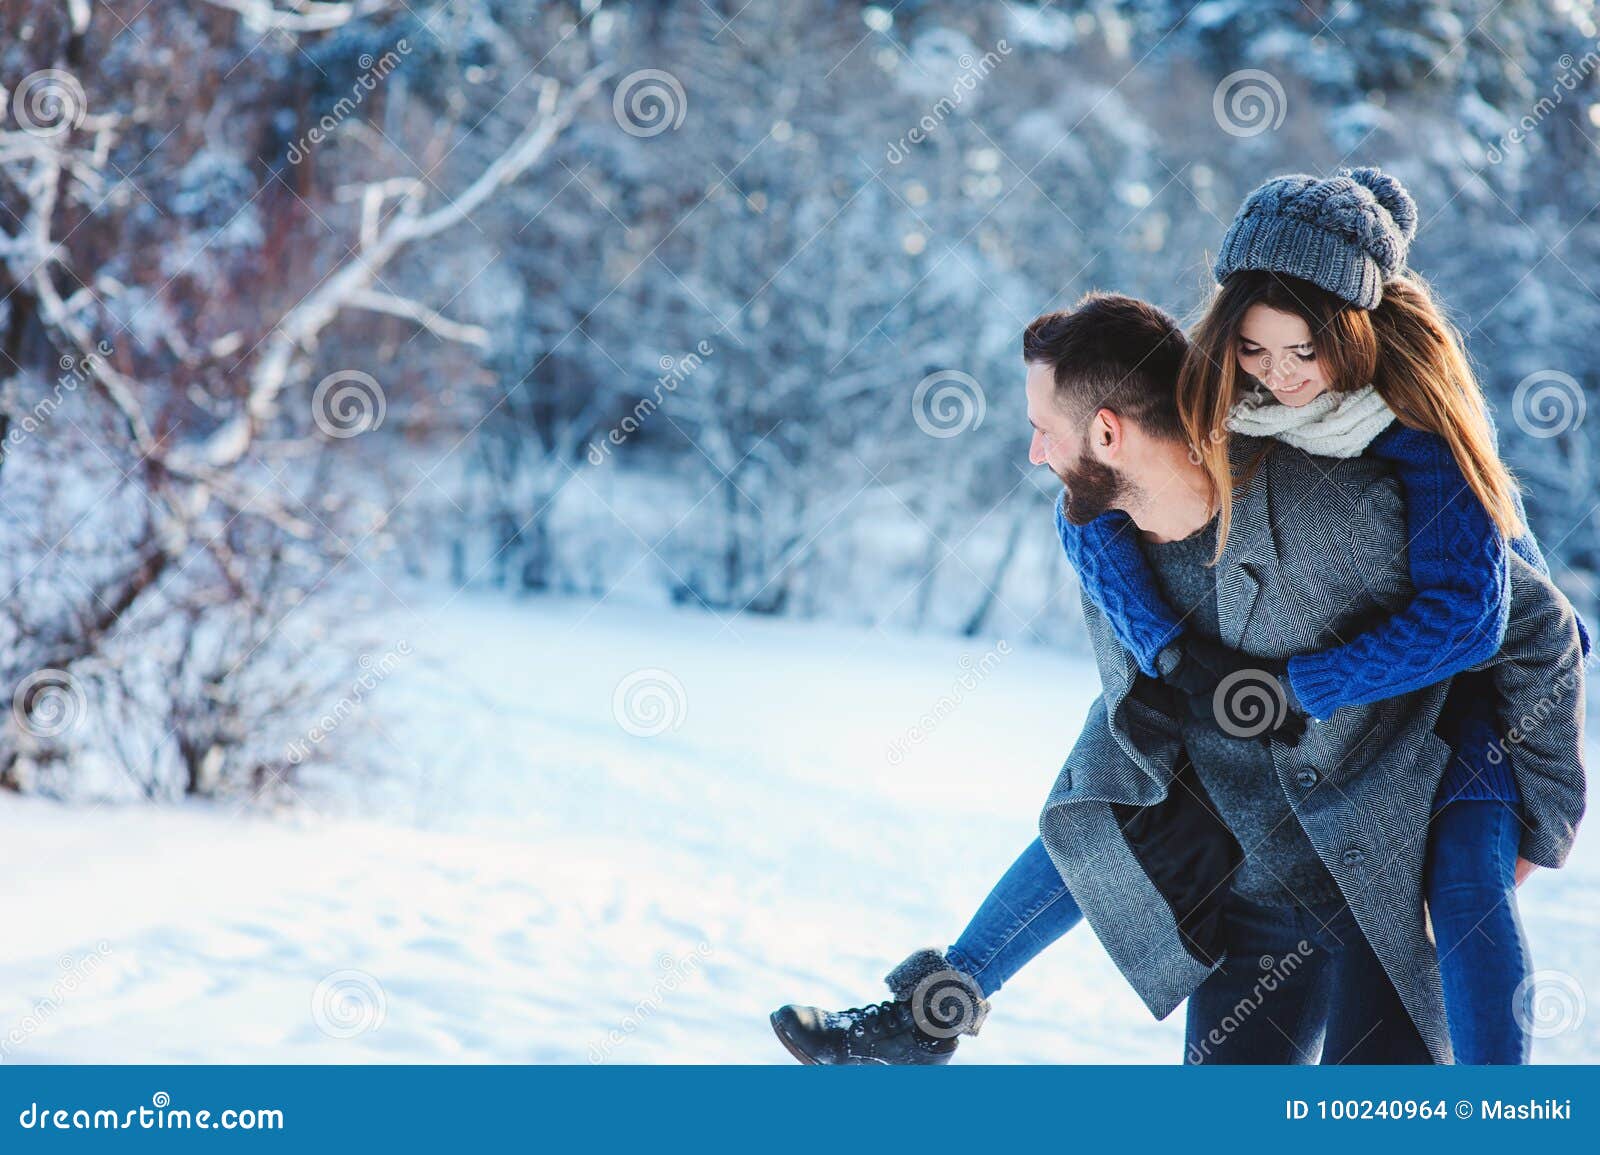 happy loving couple walking in snowy winter forest, spending christmas vacation together. outdoor seasonal activities